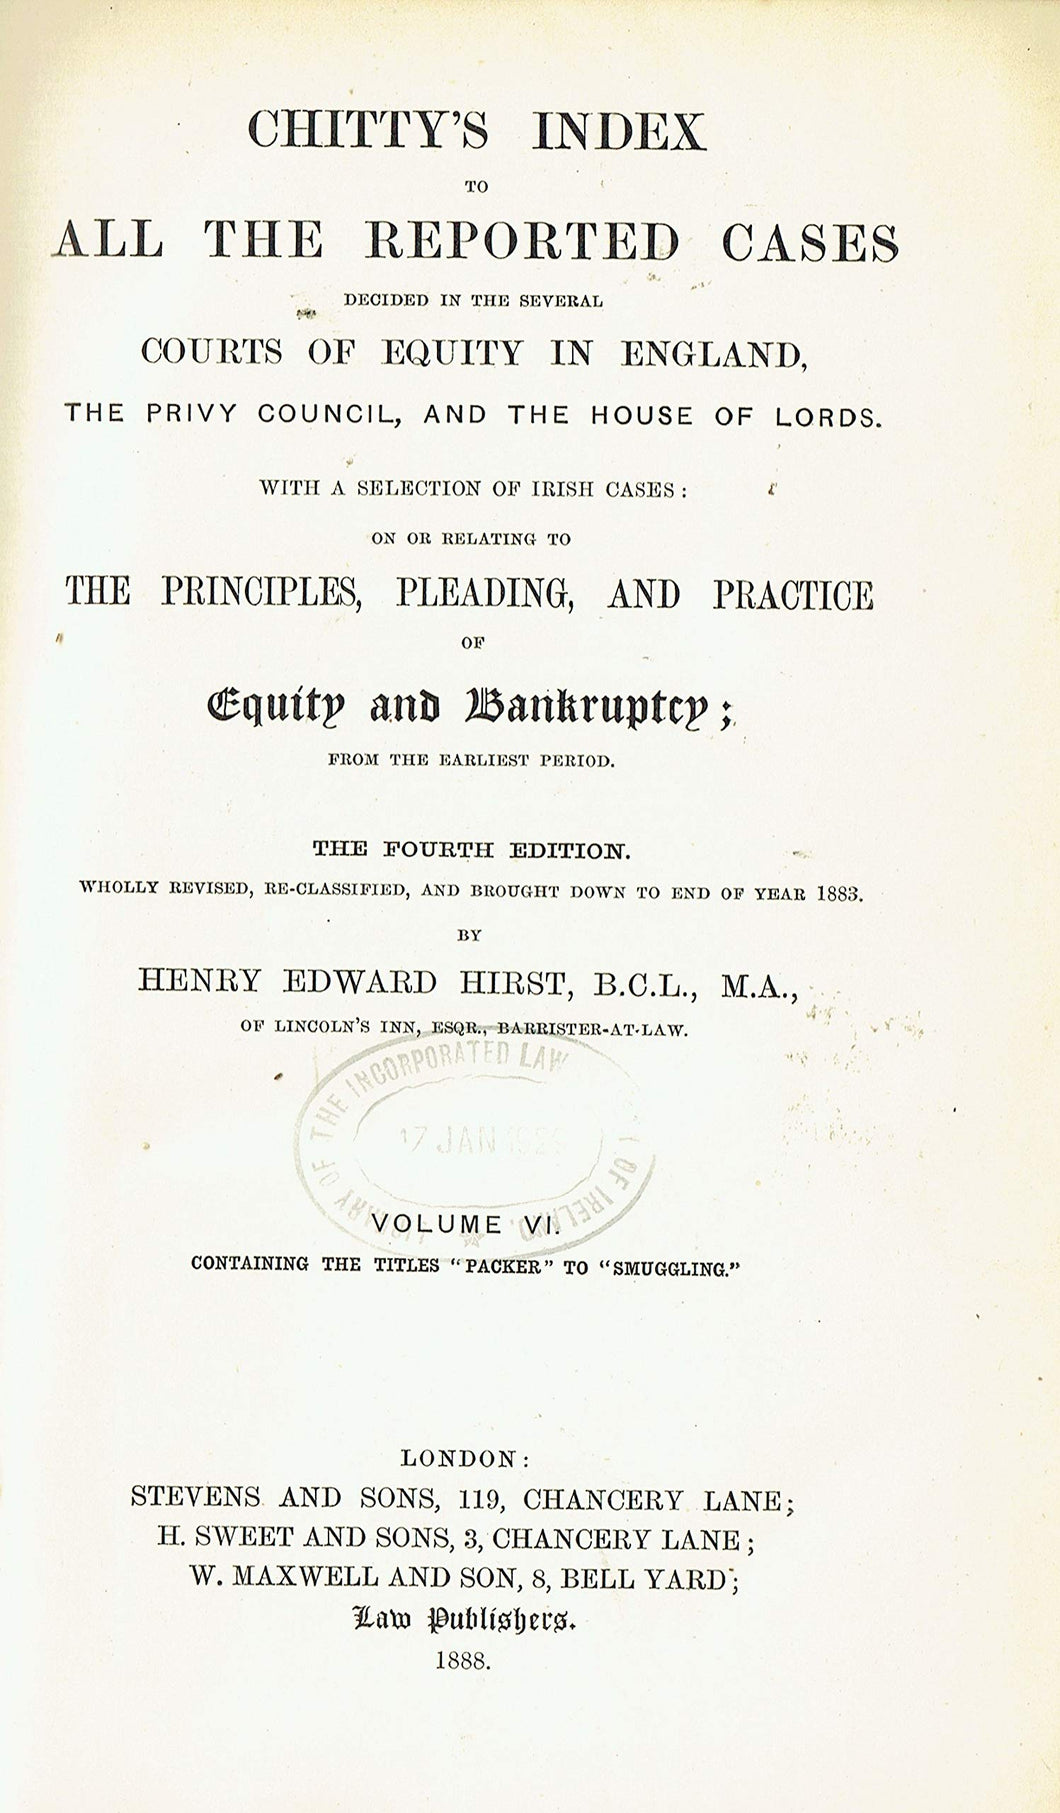 Chitty's Equity Index, Fourth Edition Volume VI (Volume 6) - Chitty's Index to All the Reported Cases Decided in the Several Courts of Equity in England, the Privy Council, and the House of Lords